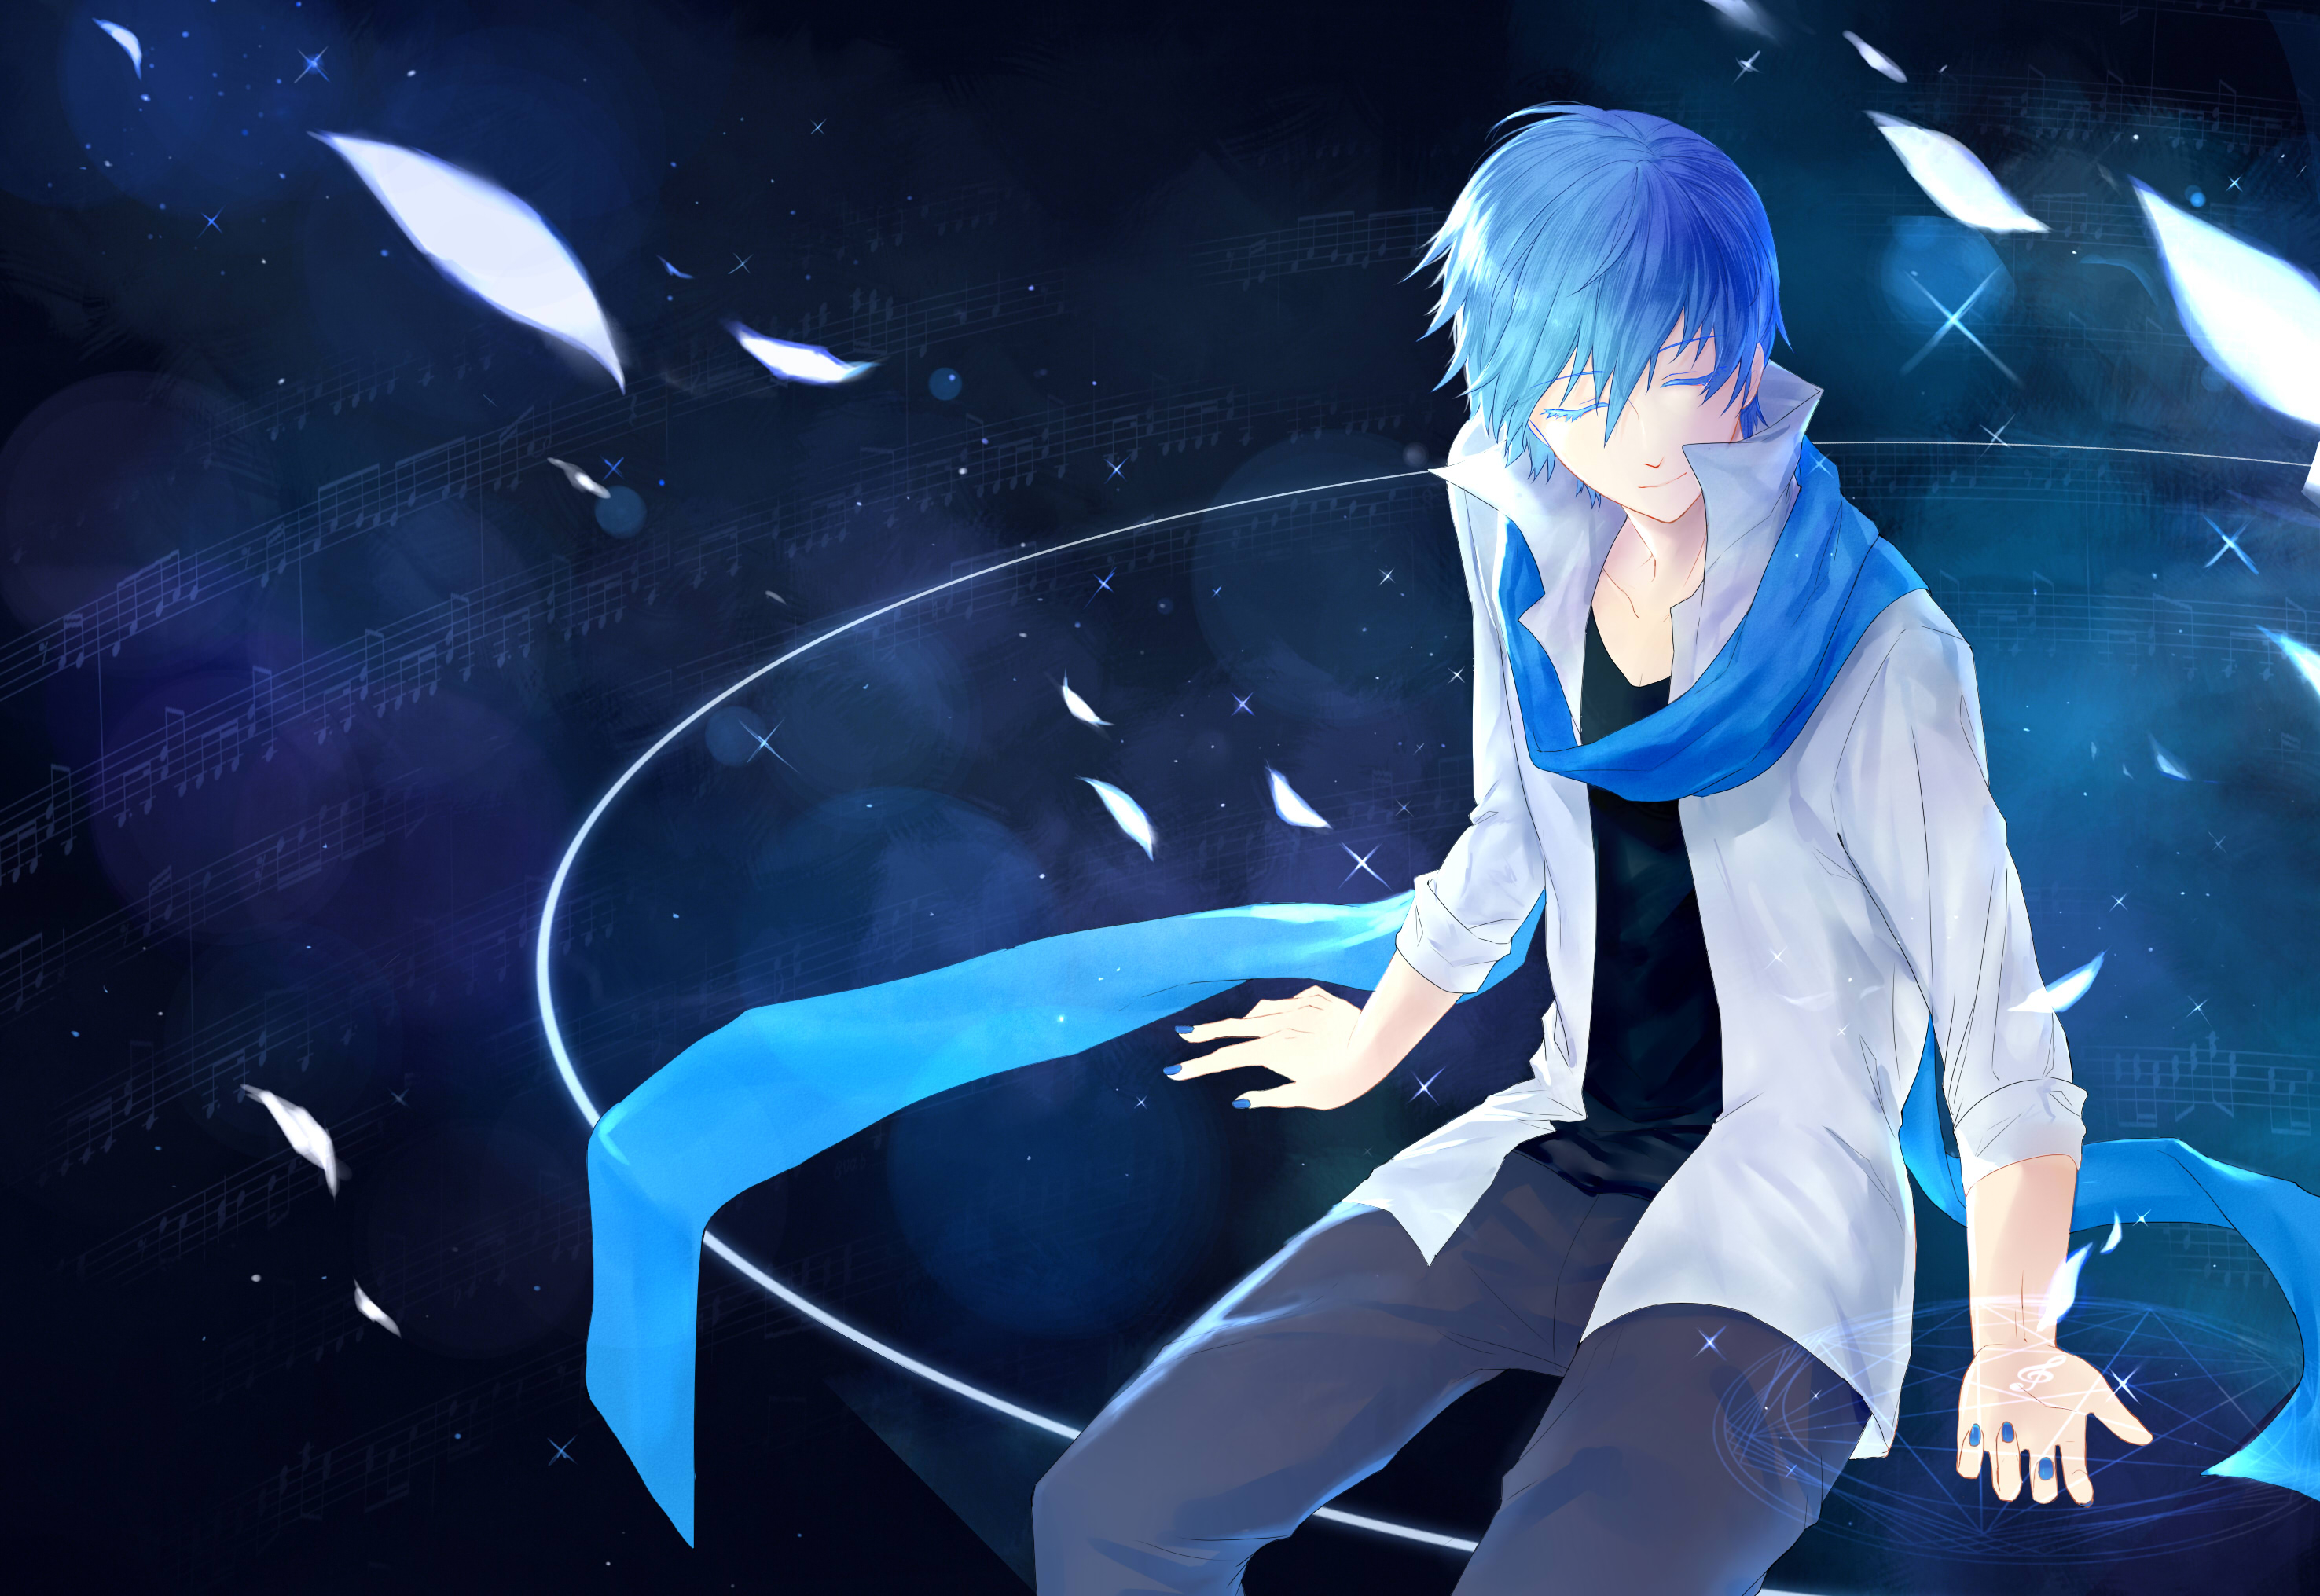 2952x2031 390+ Kaito (Vocaloid) HD Wallpapers and Backgrounds